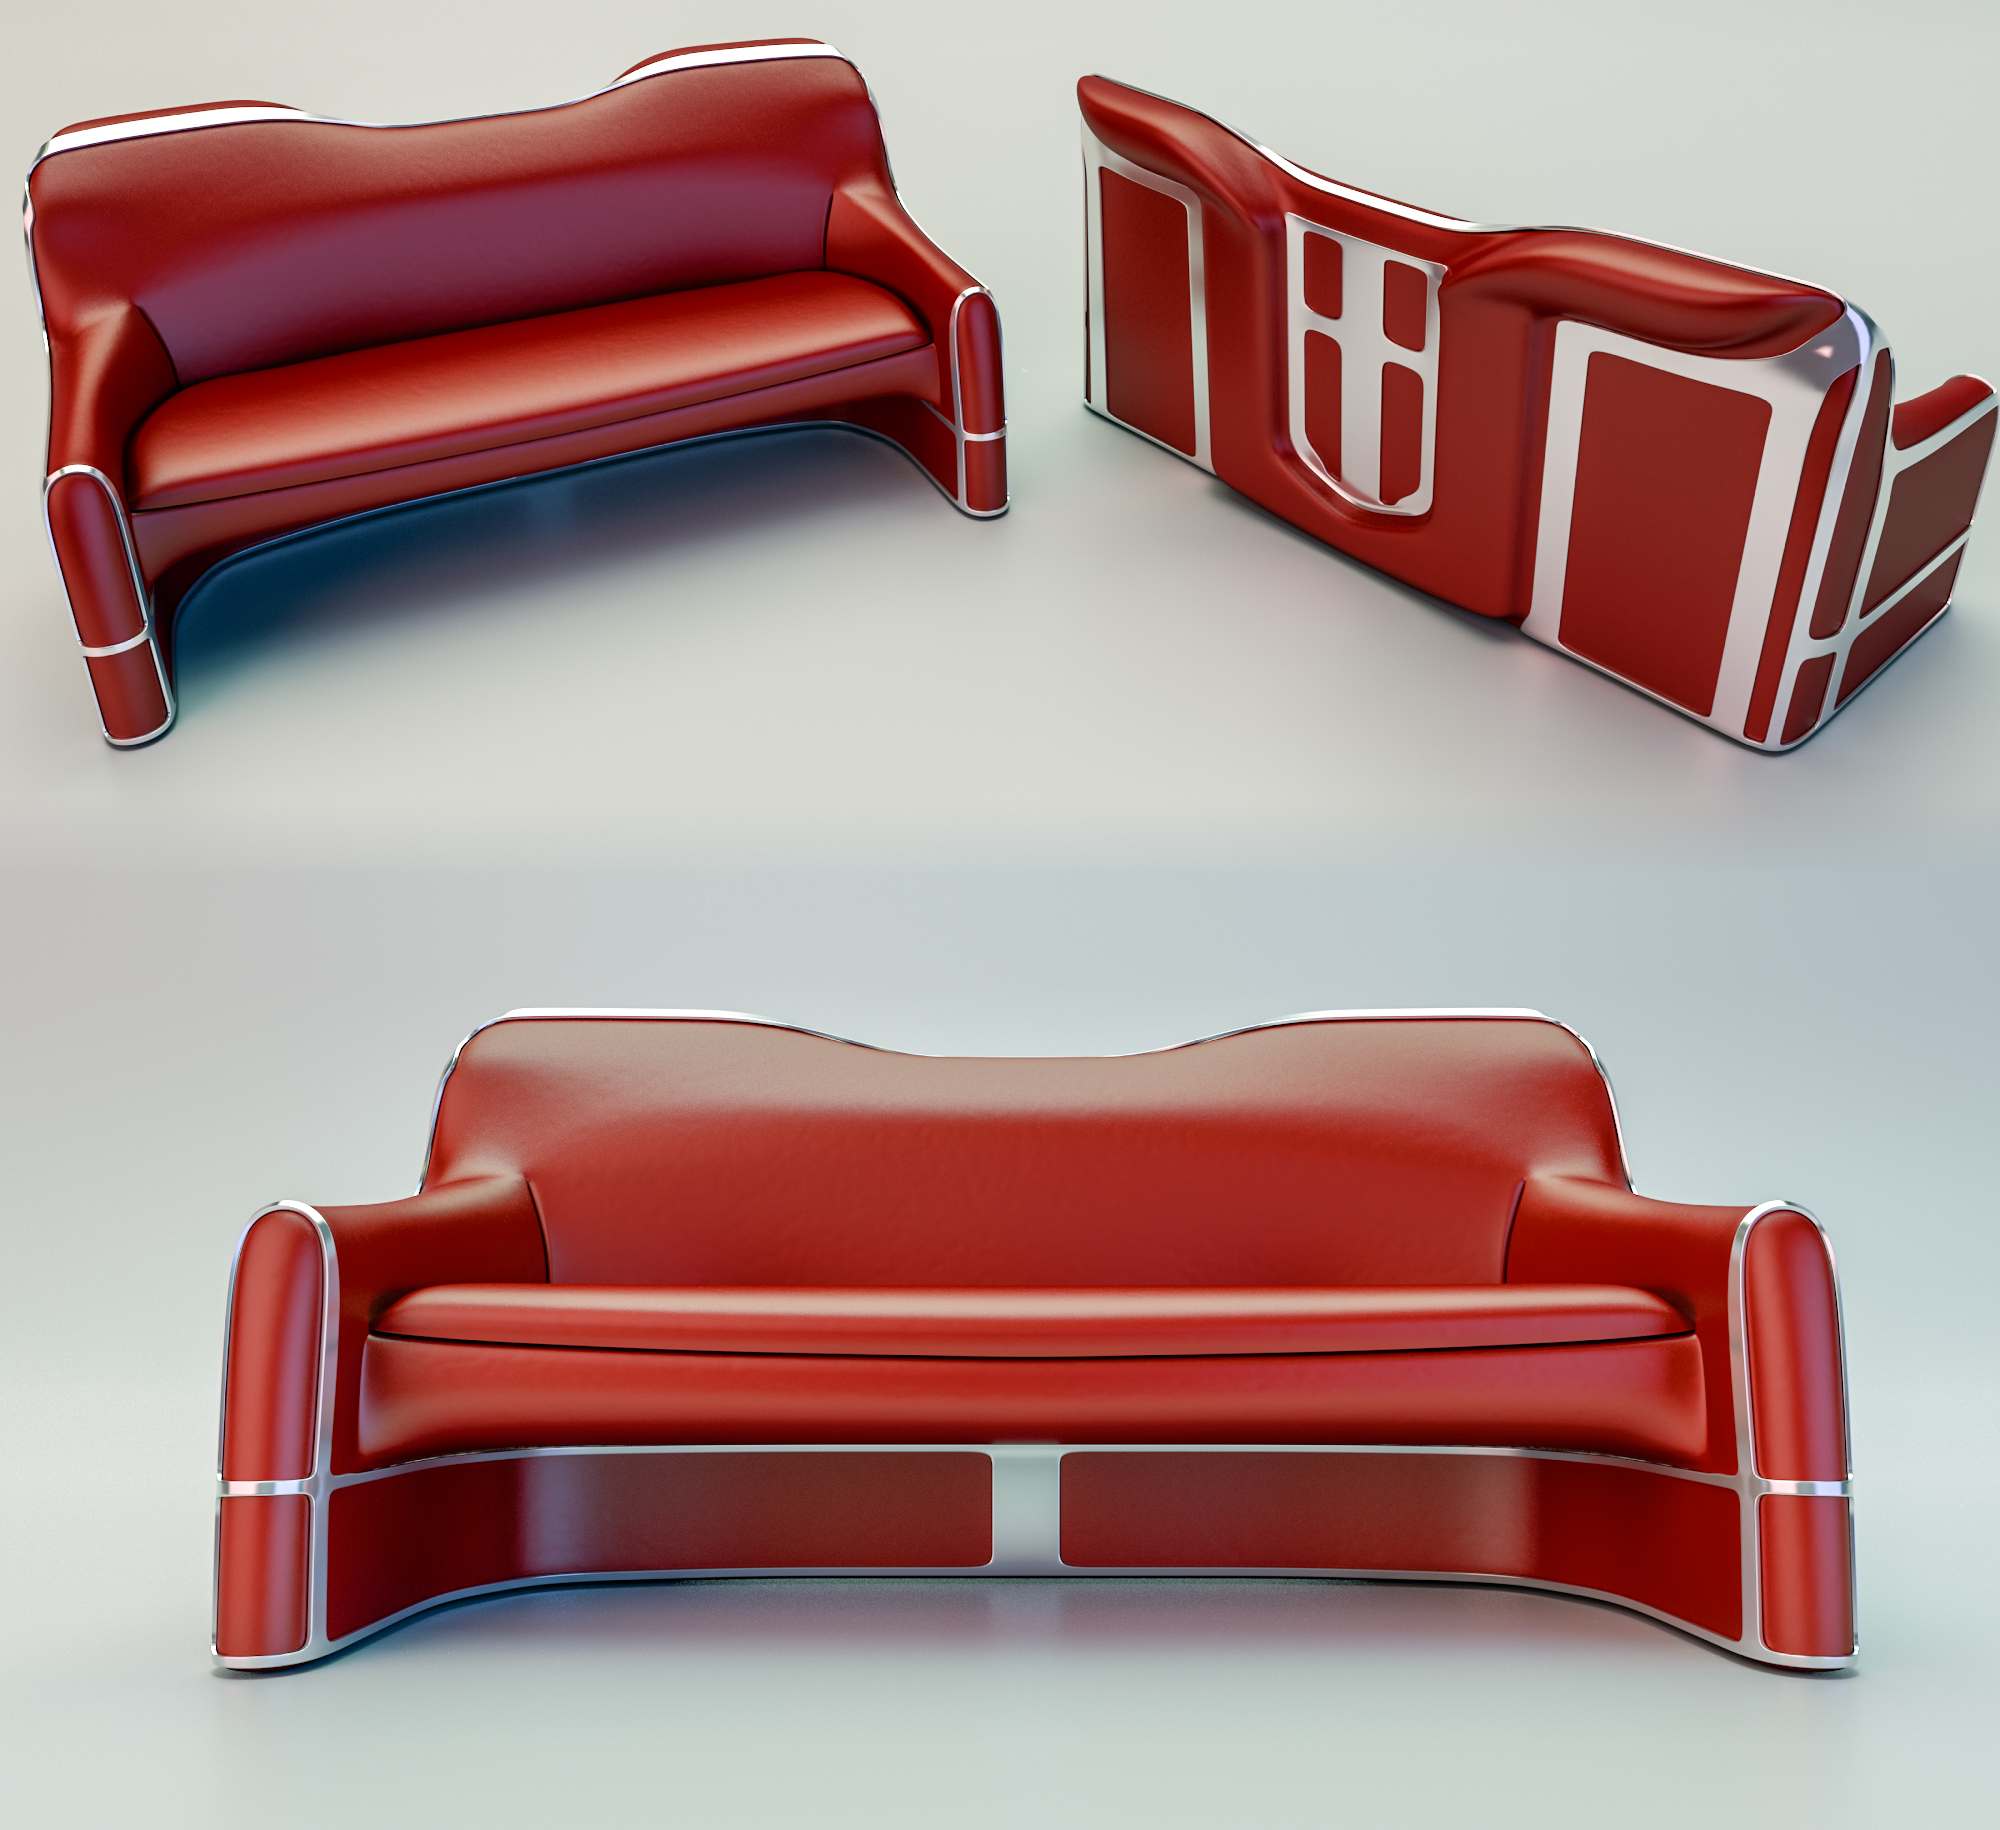 industrialdesign10 Industrial Design Modeled and Rendered in Modo by Mike Grauer